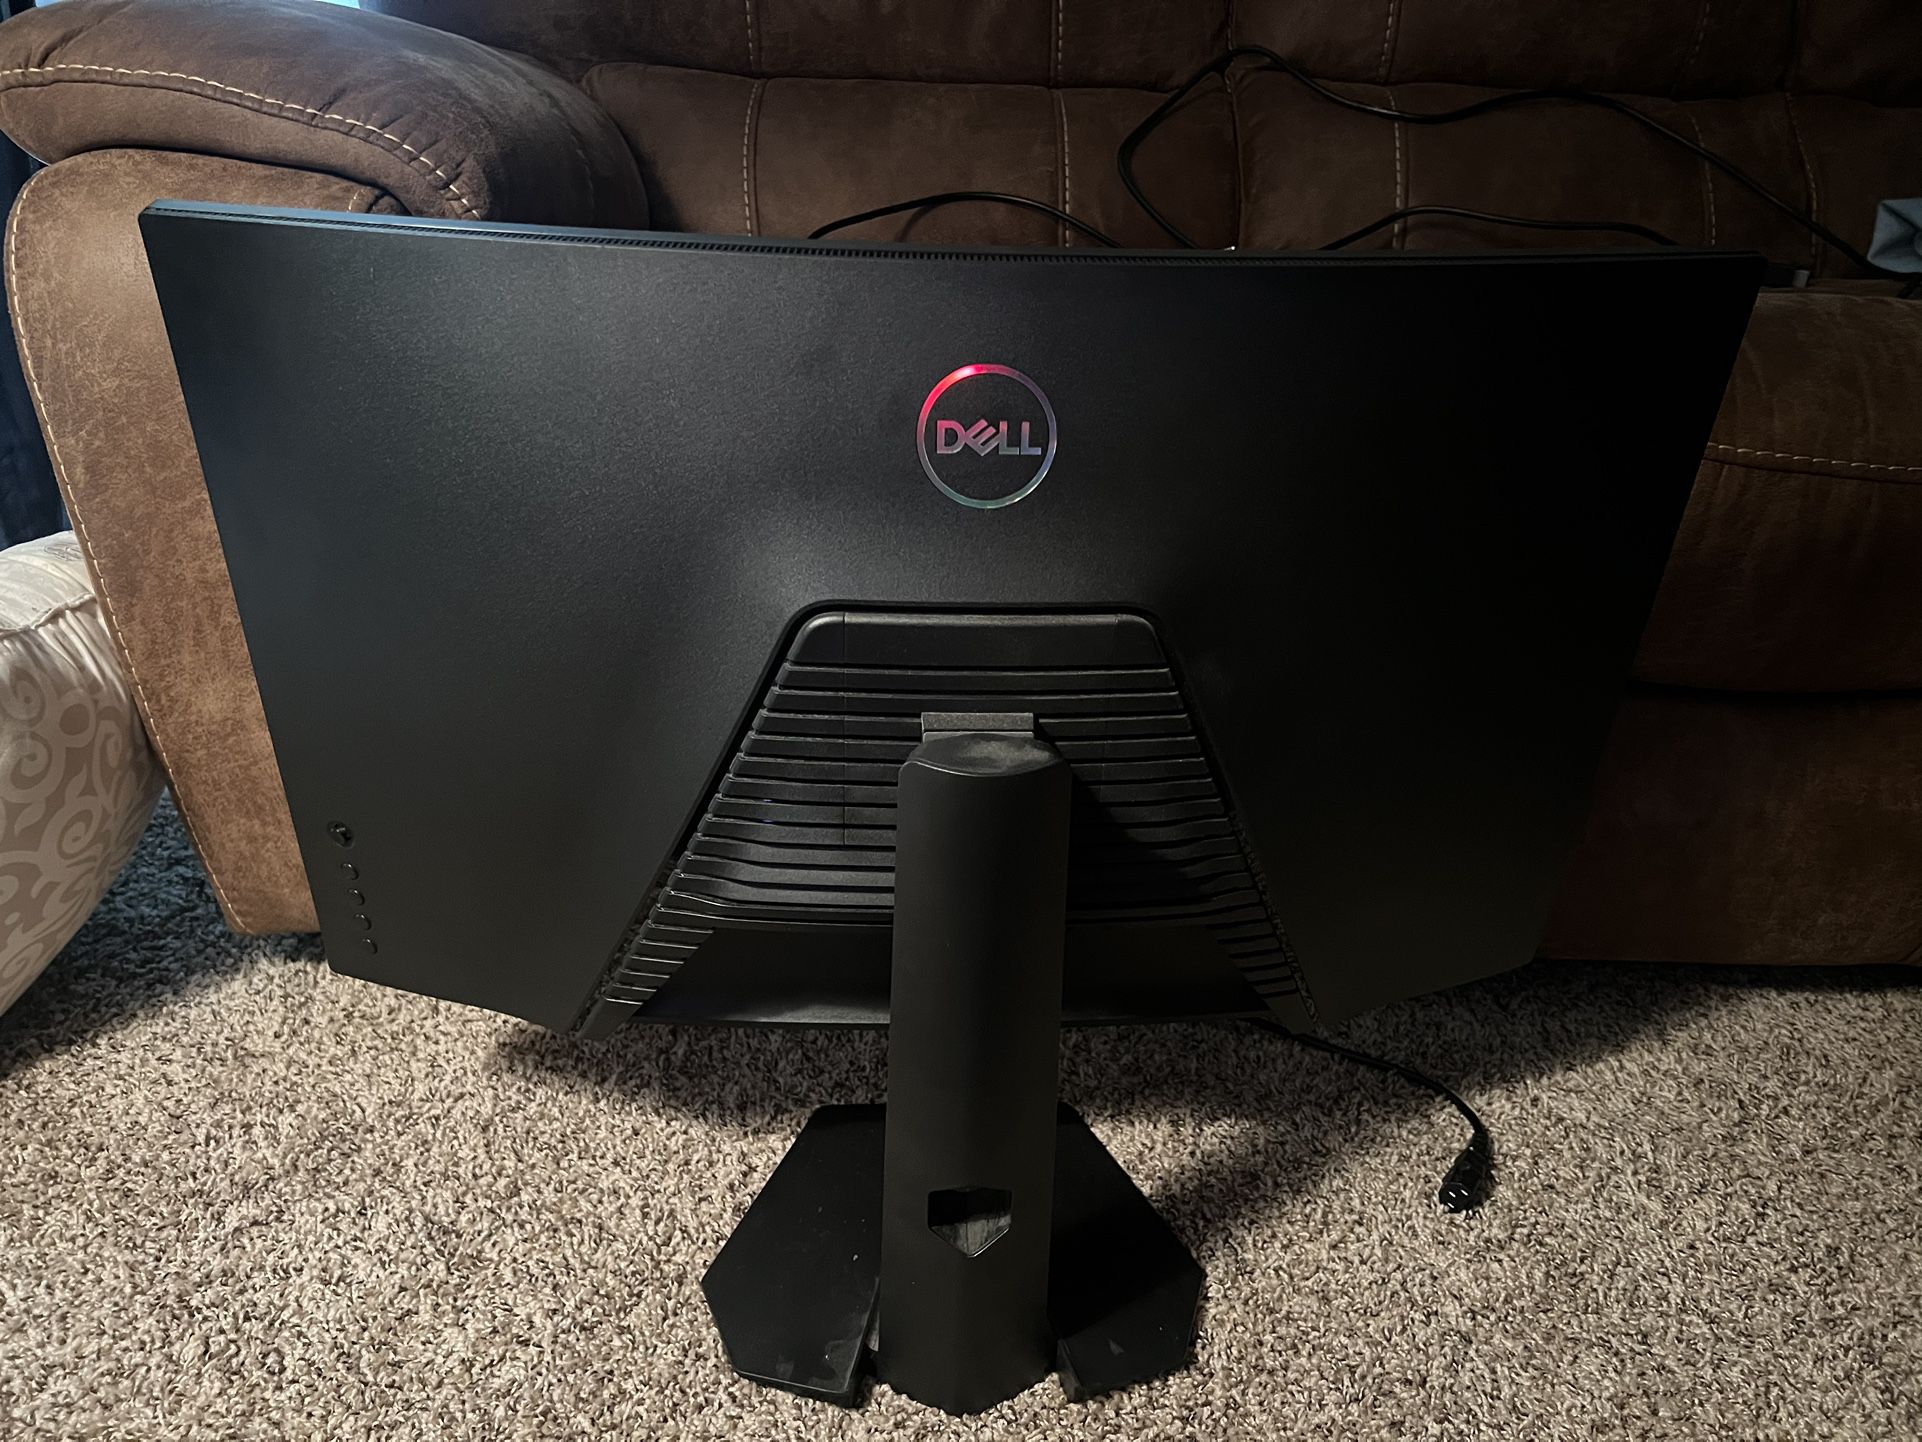 32" Curved 165hz Dell Monitor 